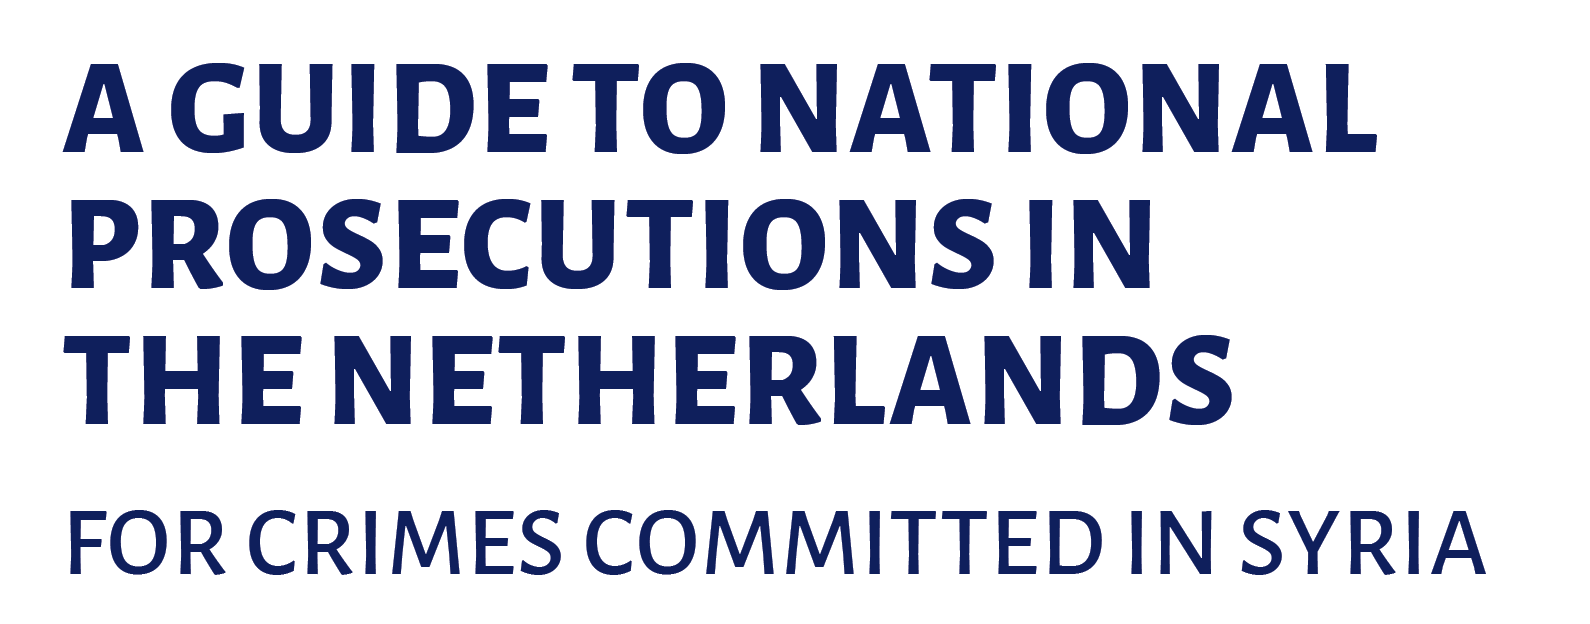 A Guide to National Prosecutions in the Netherlands